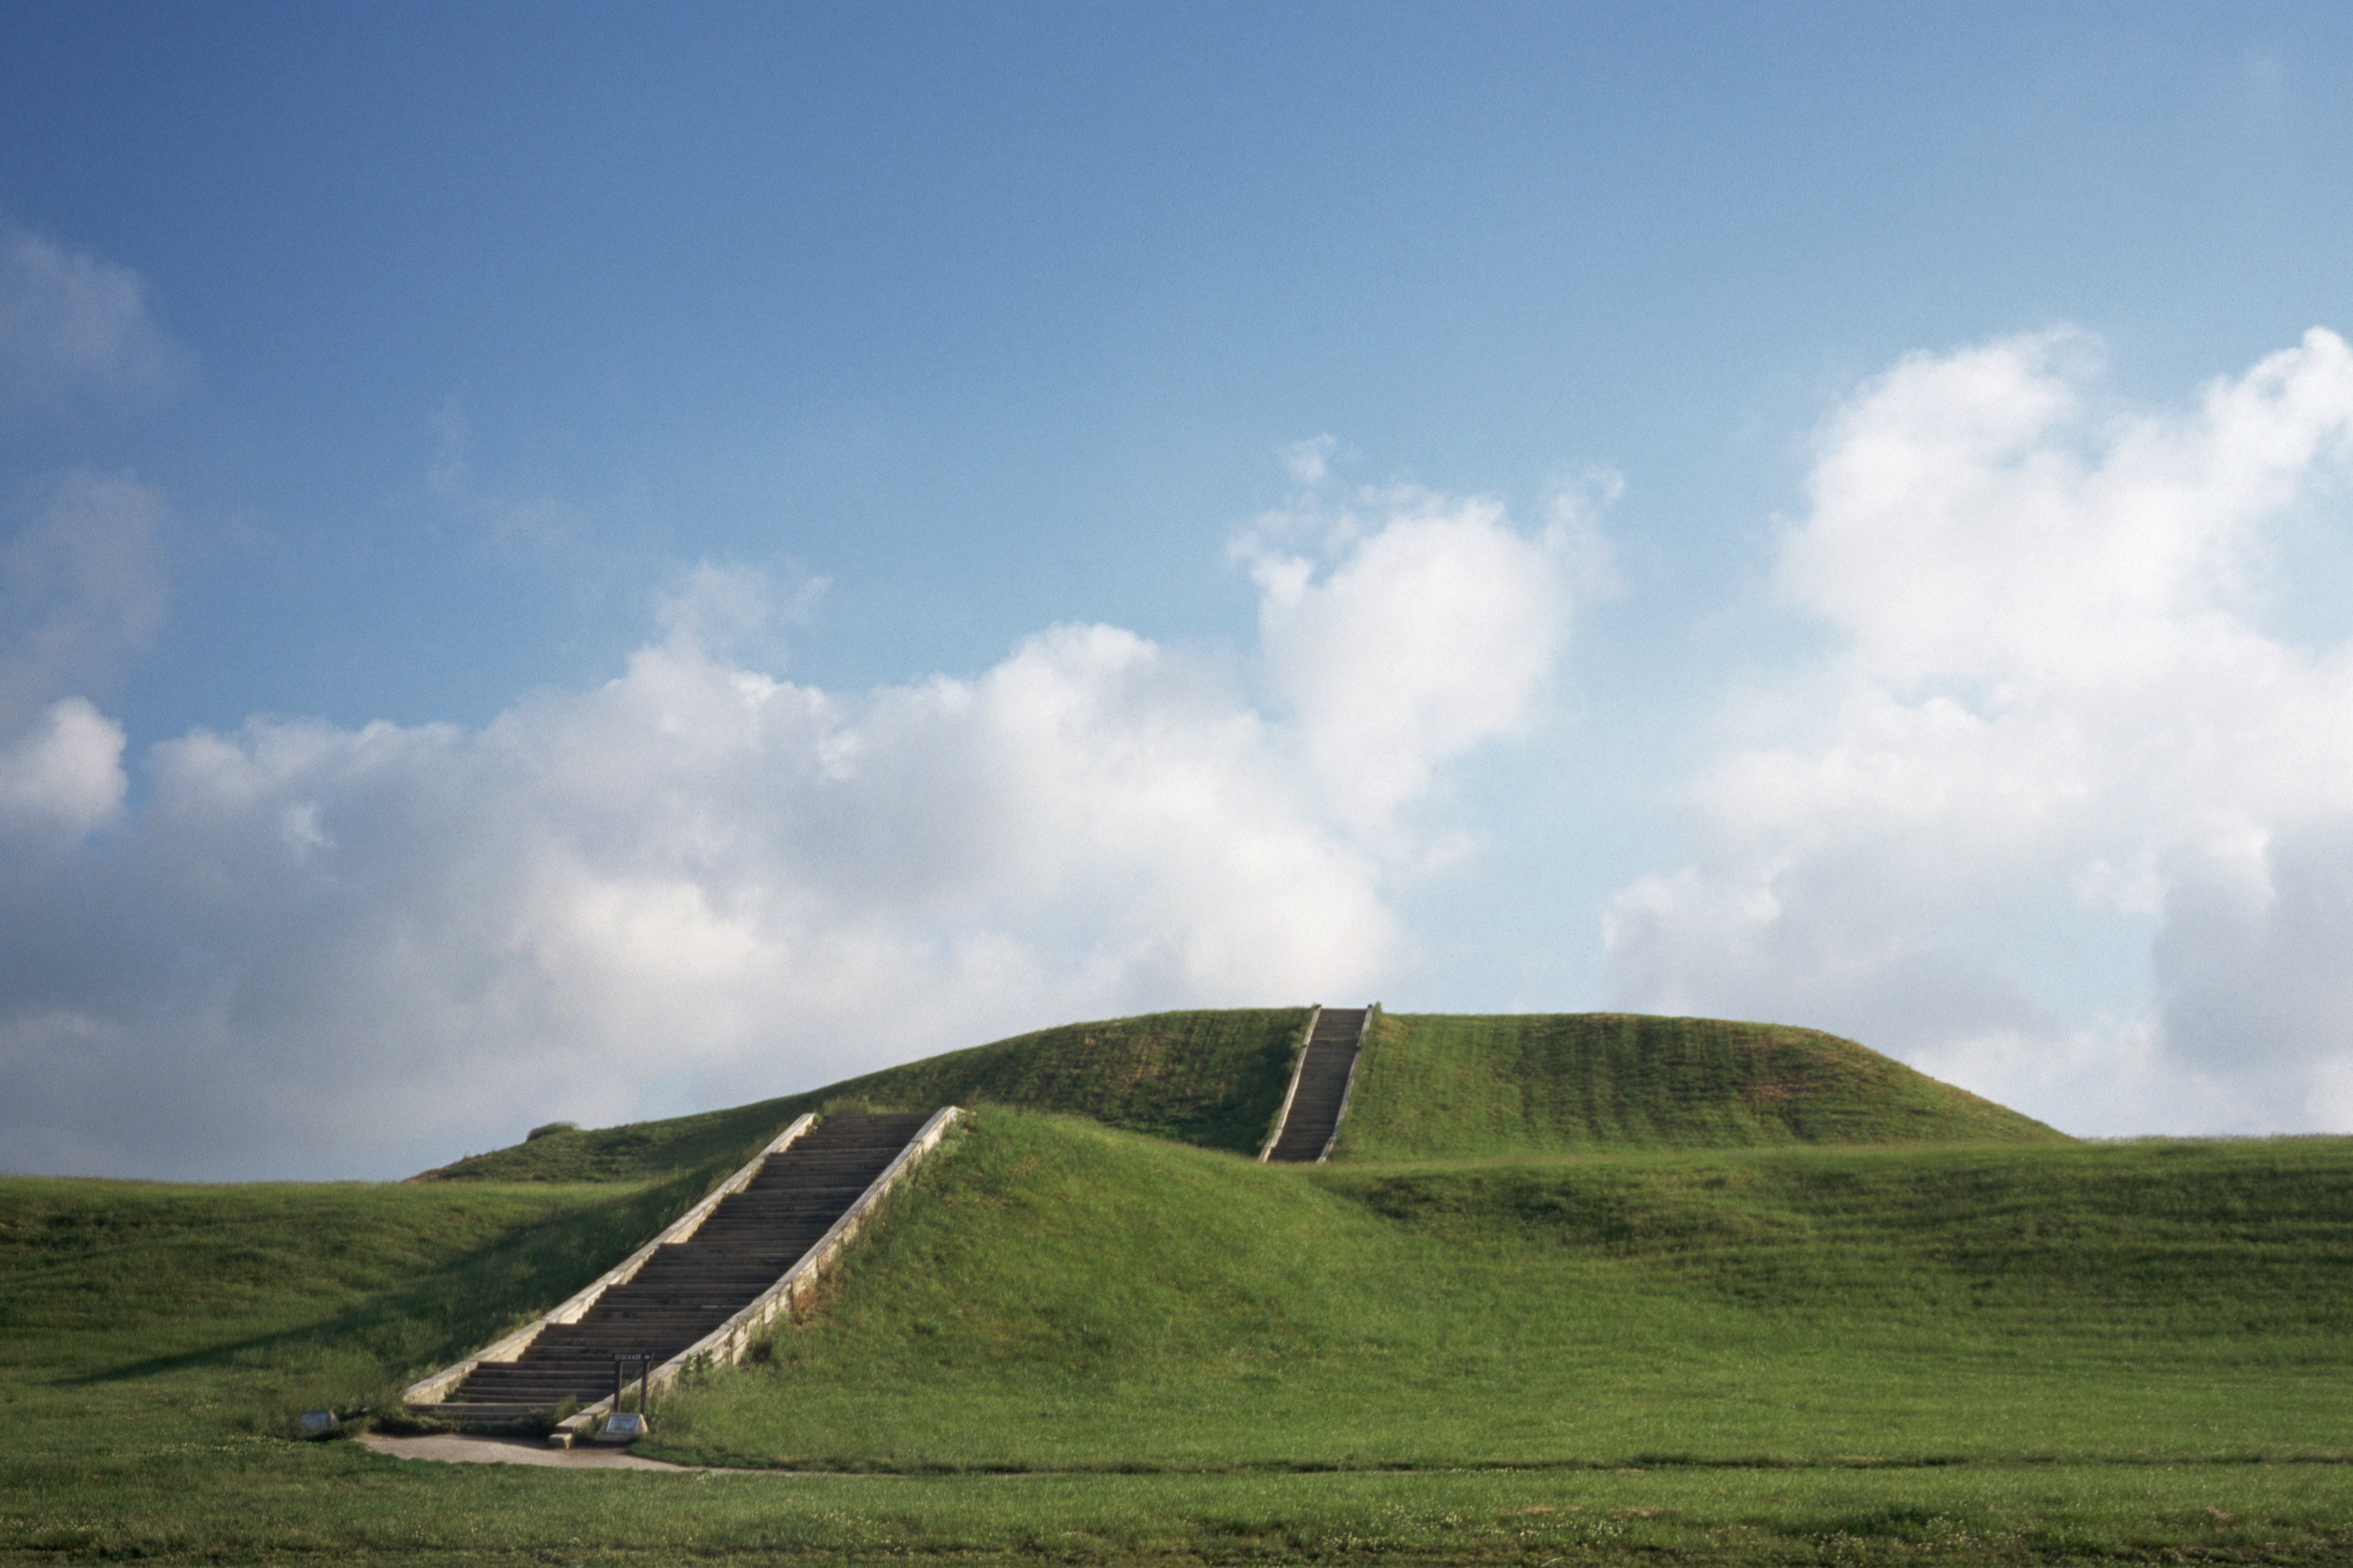 A mound at the ancient North American settlement of Cahokia.